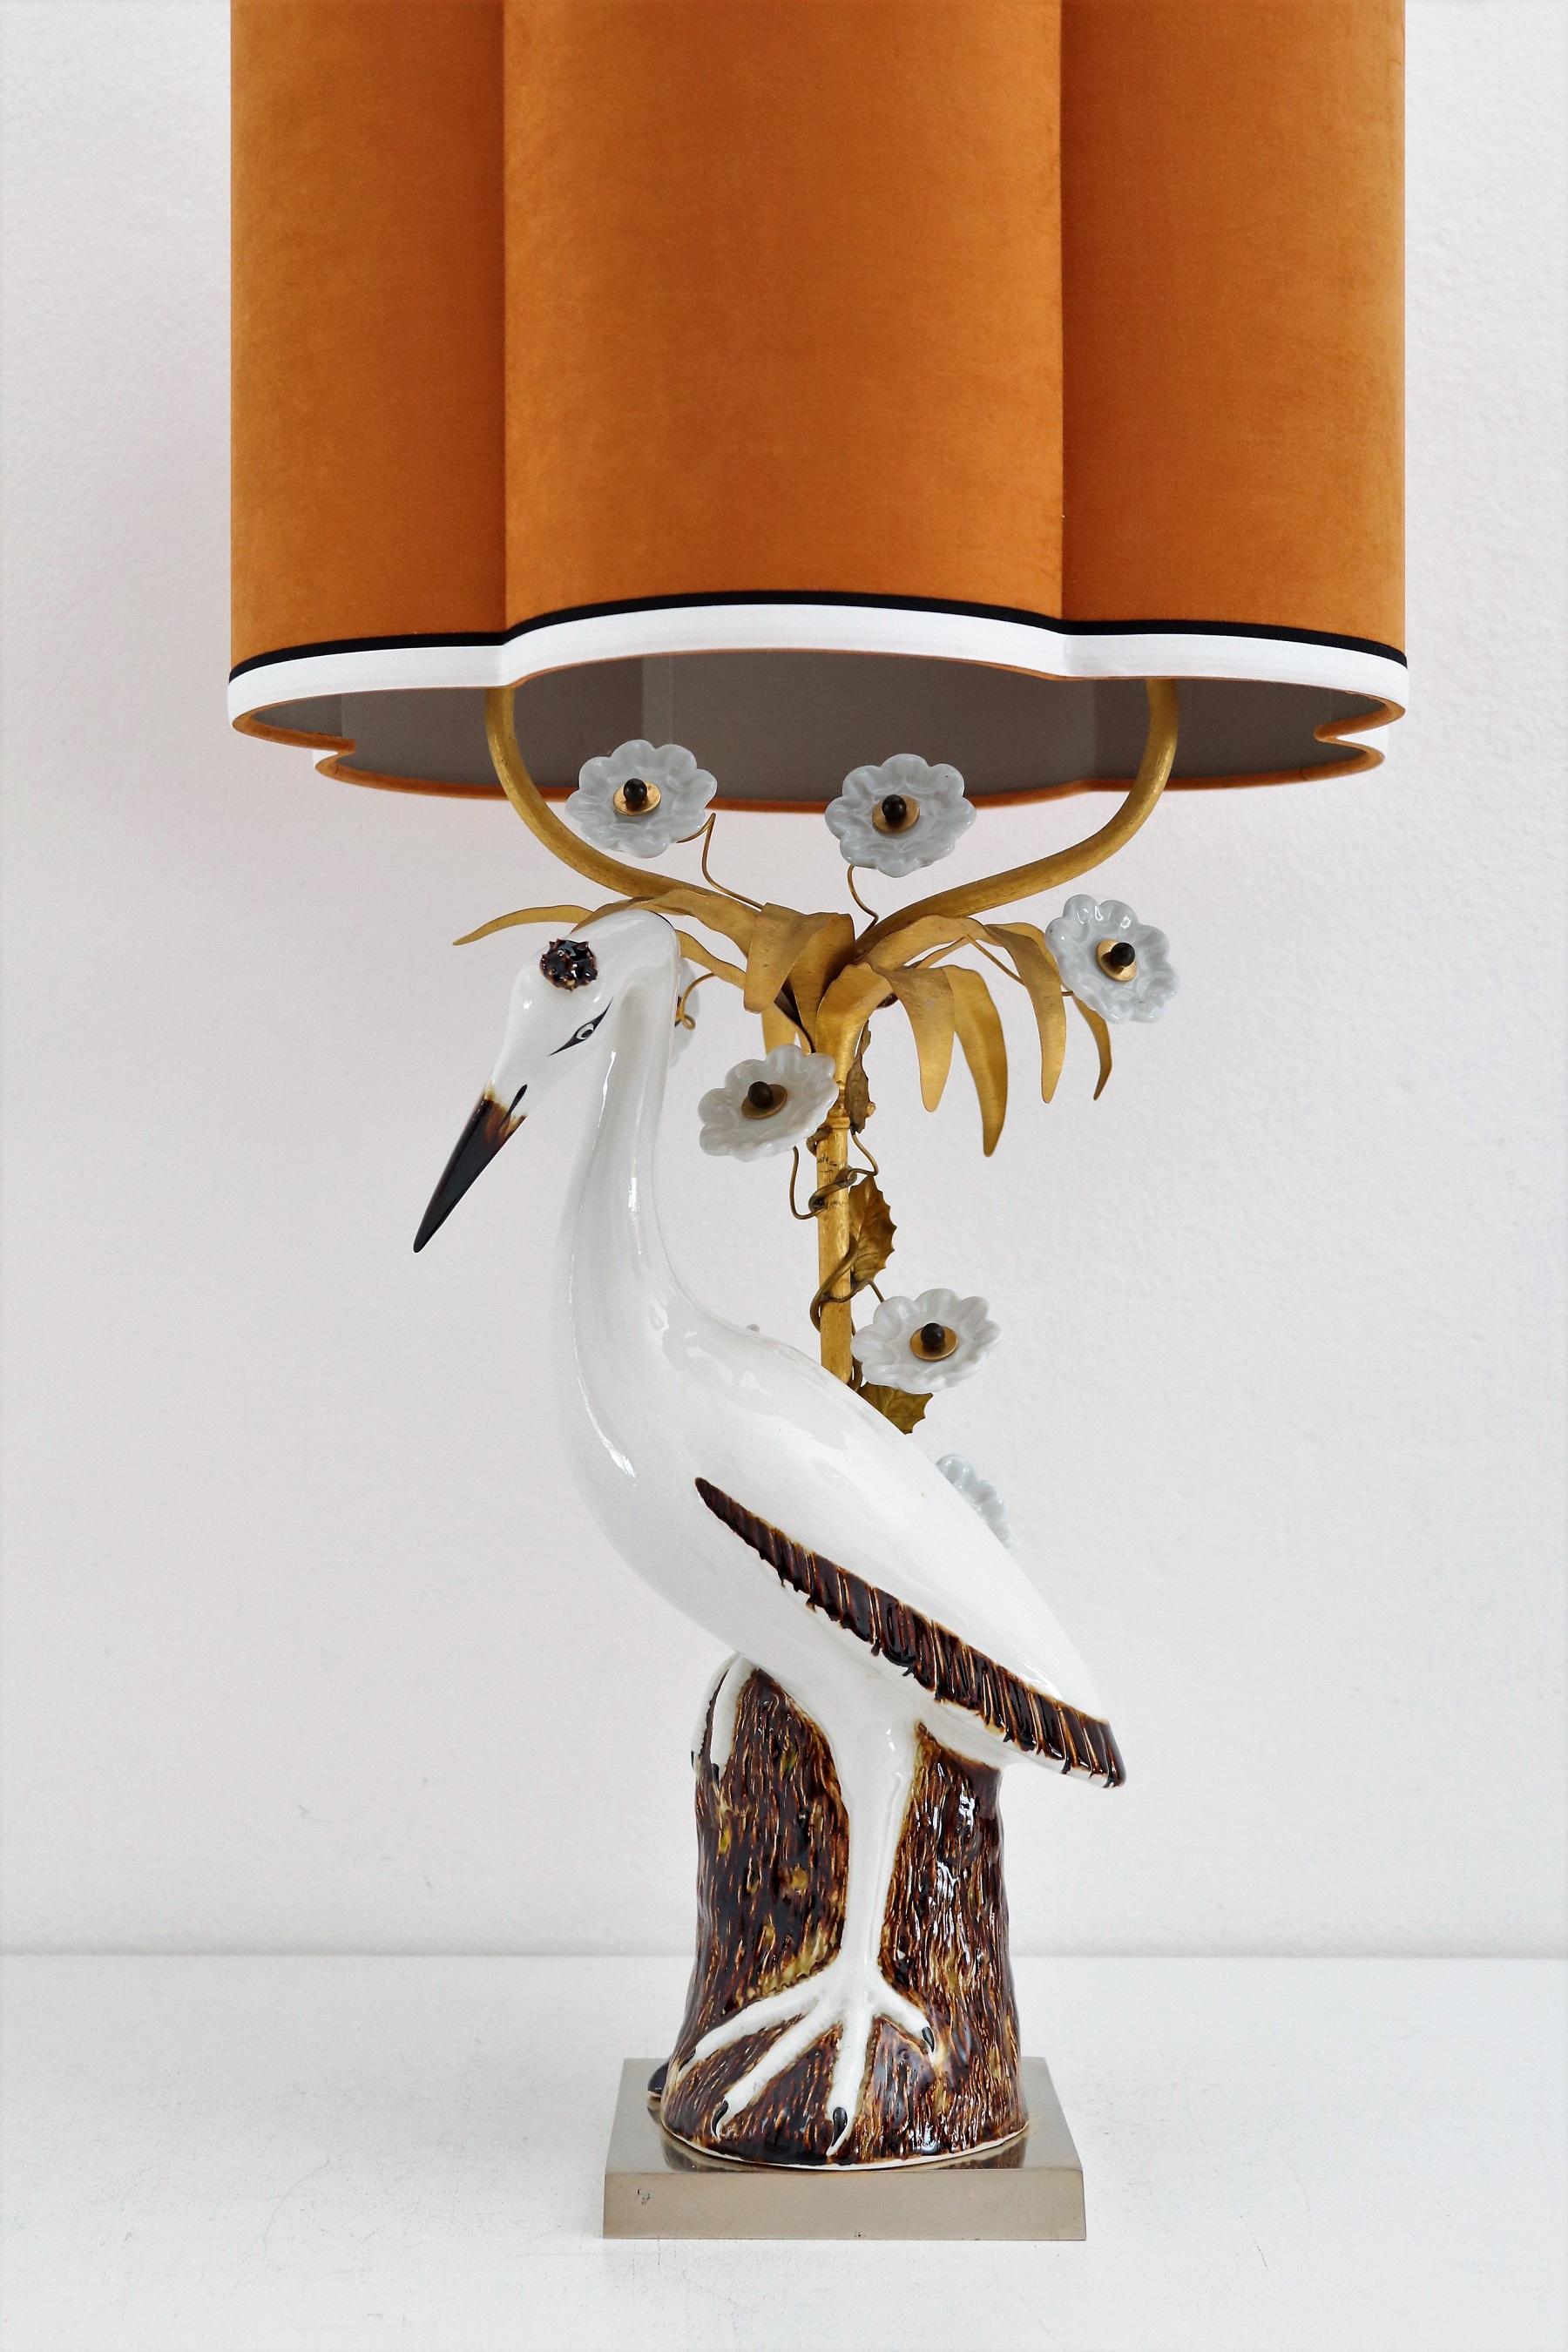 Gorgeous table lamp in the shape of a crane or heron, made of hand-painted porcelain.
Made in France during the 1960s - 1970s.
The crane - heron porcelain figurine is standing on a gilt metal base in front of a gilt metal bar, which holds the